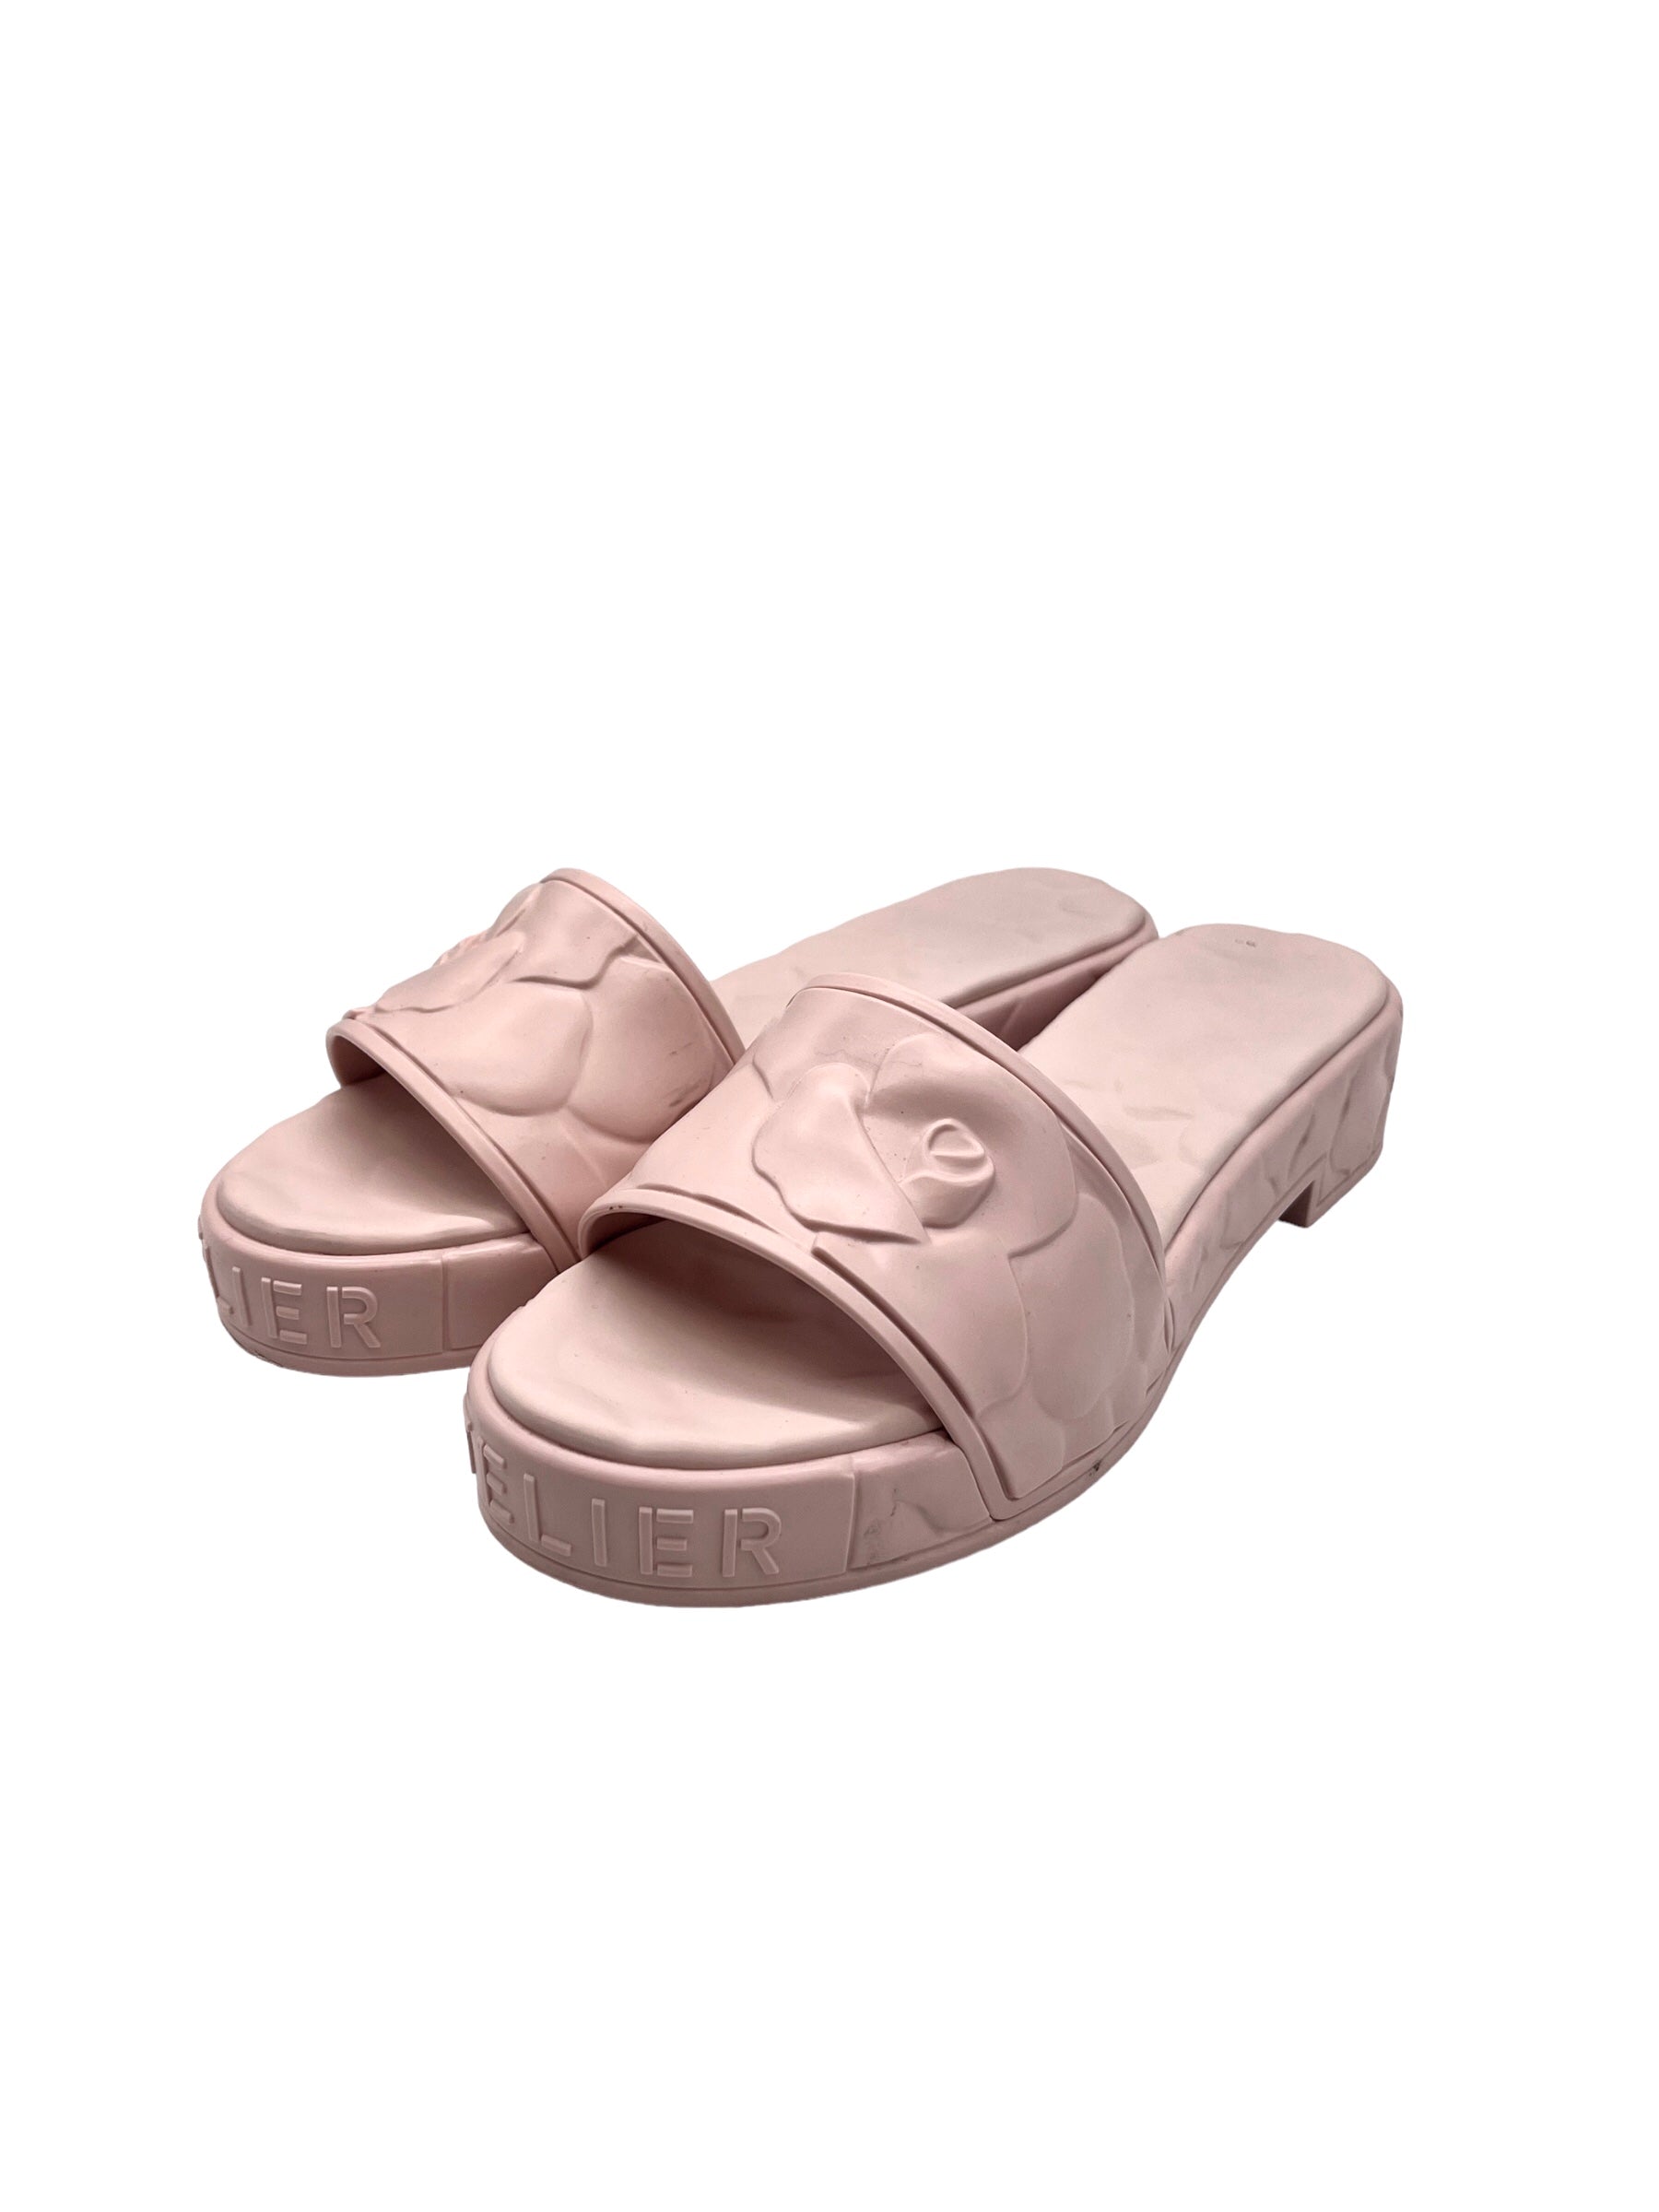 Valentino Pink Floral Rubber Sandals